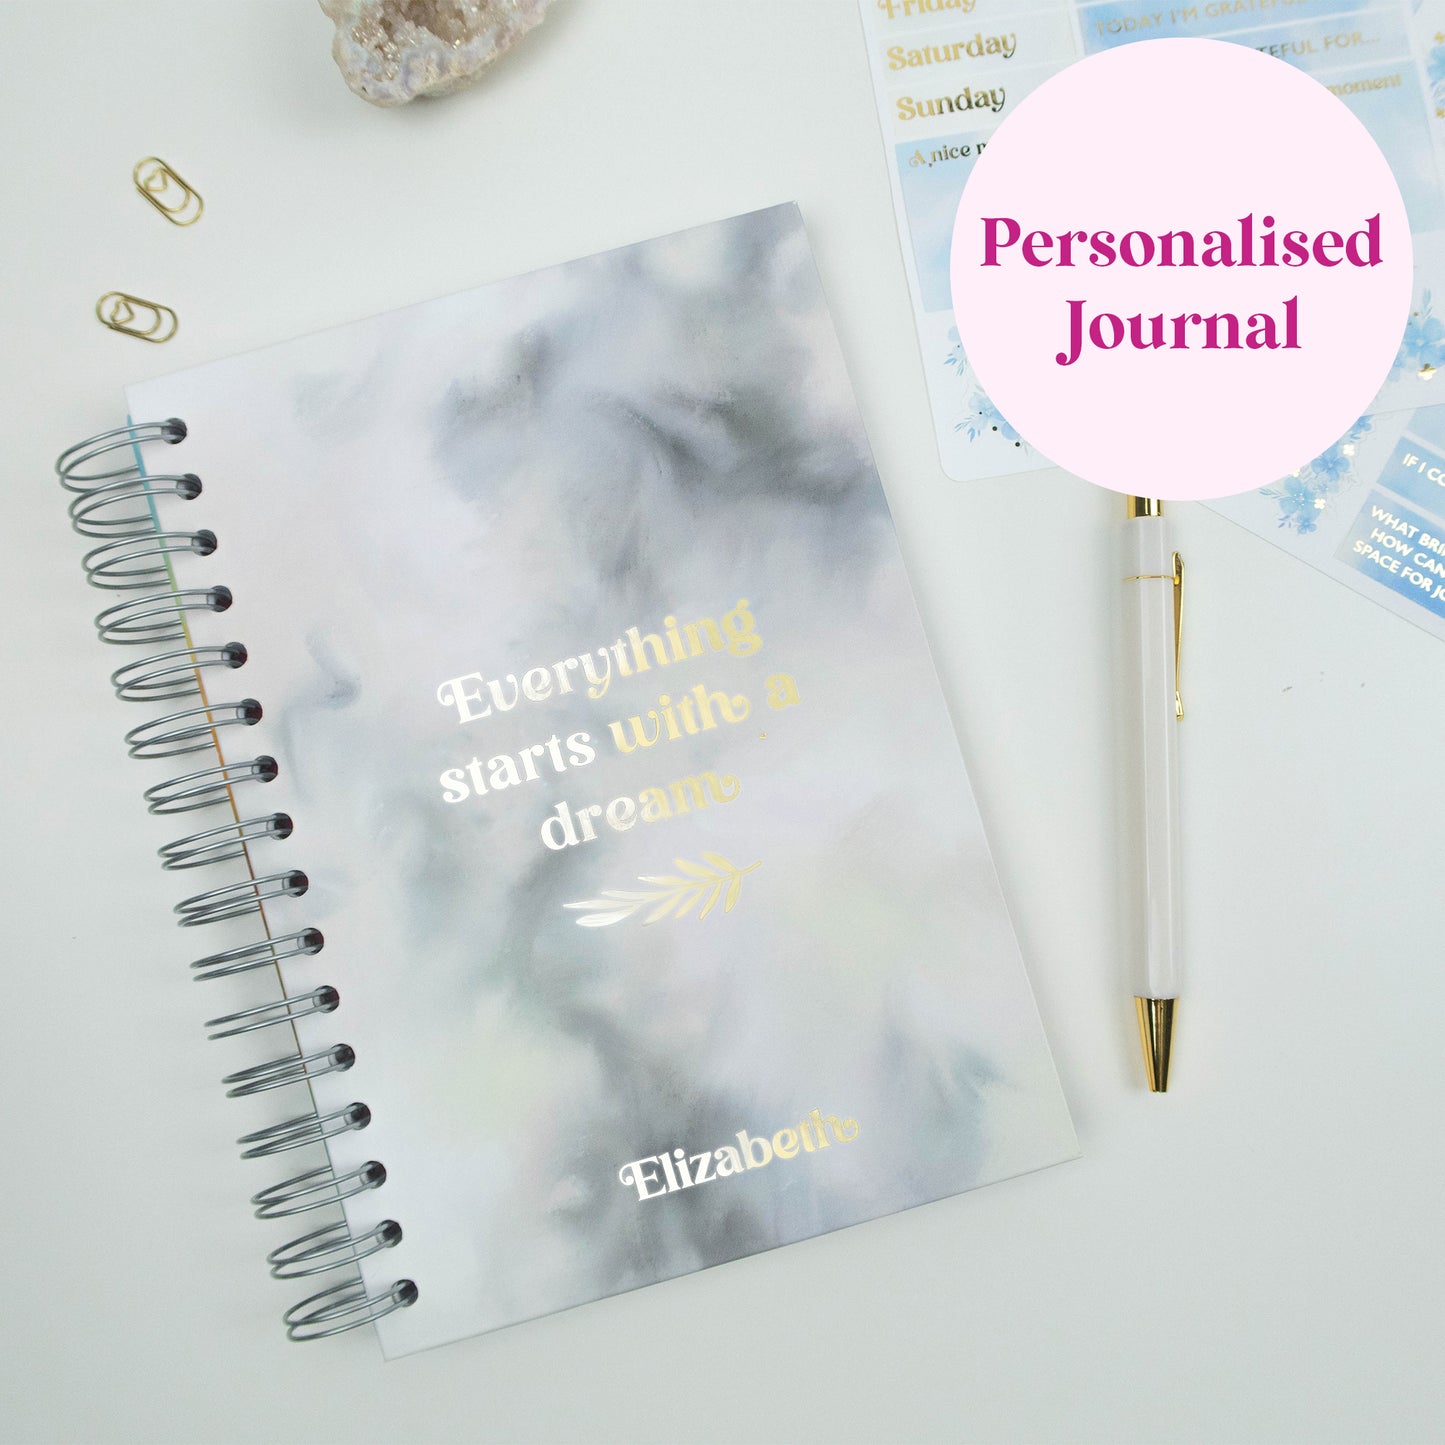 EVERYTHING STARTS WITH A DREAM - LUXE PERSONALISED JOURNAL